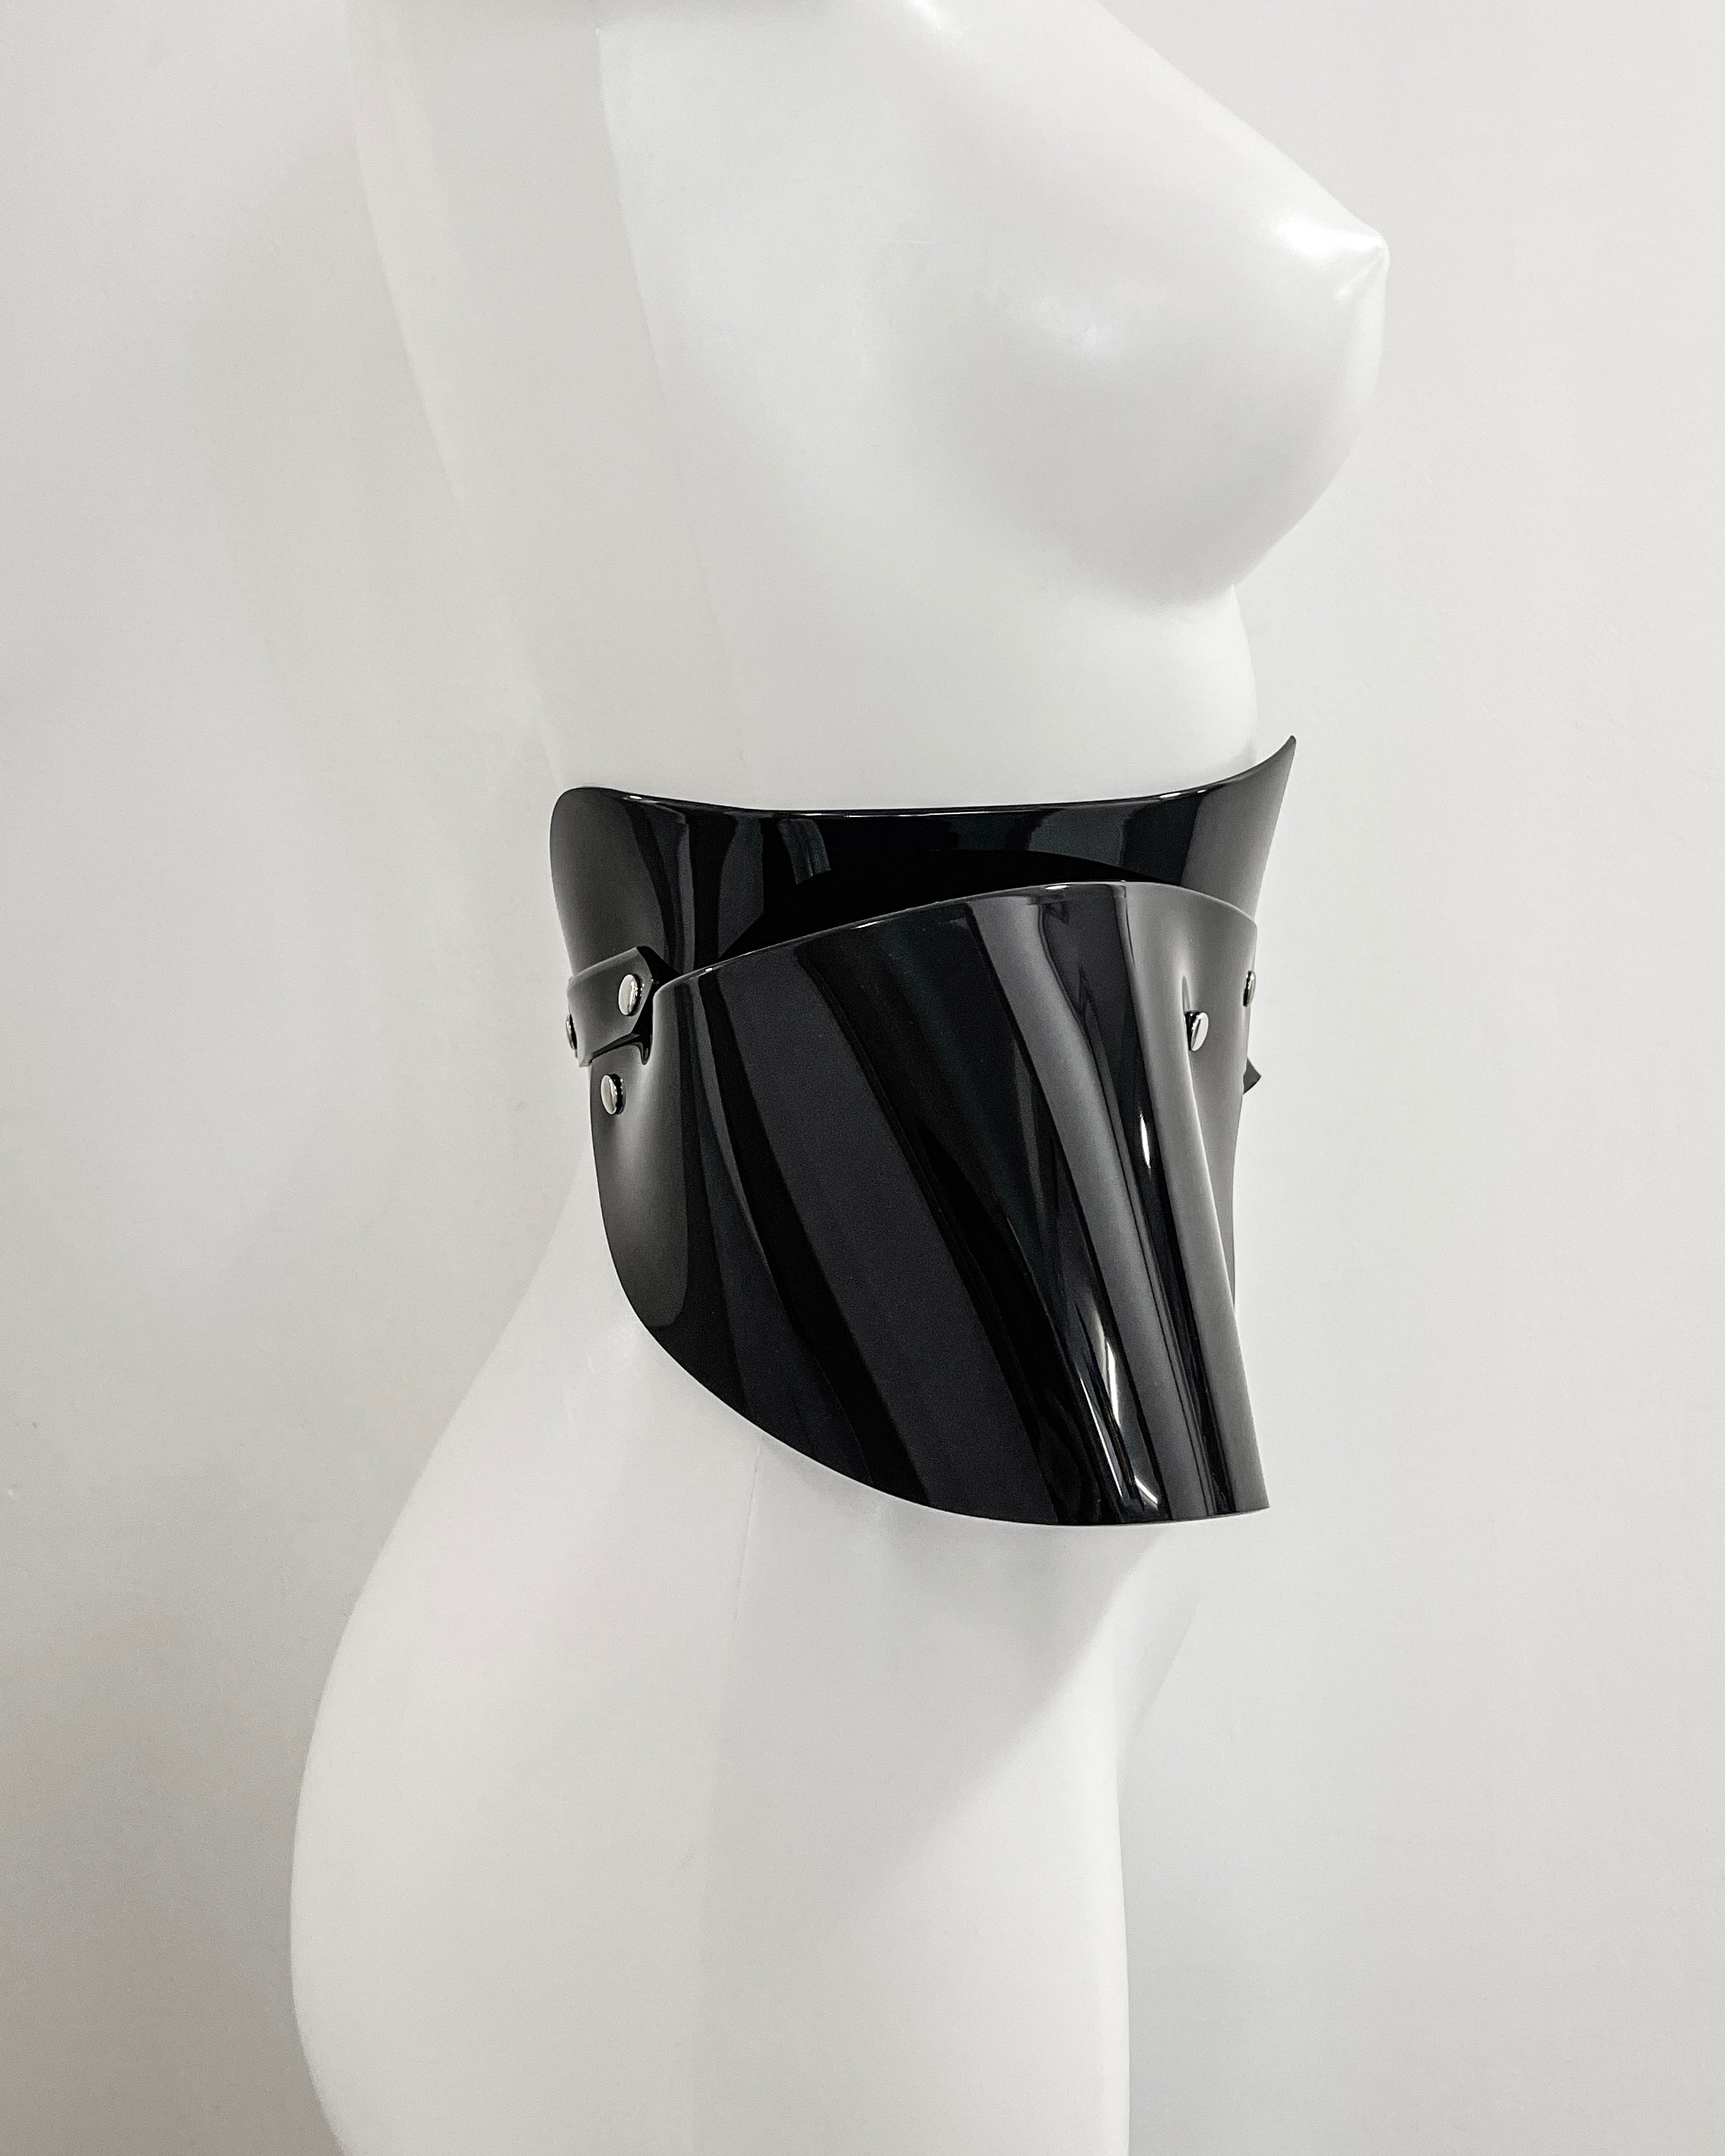 Jivomir Domoustchiev vegan vinyl pvc fashion wearable sculpture belt hand crafted to order only in East London Atelier independent luxury brand